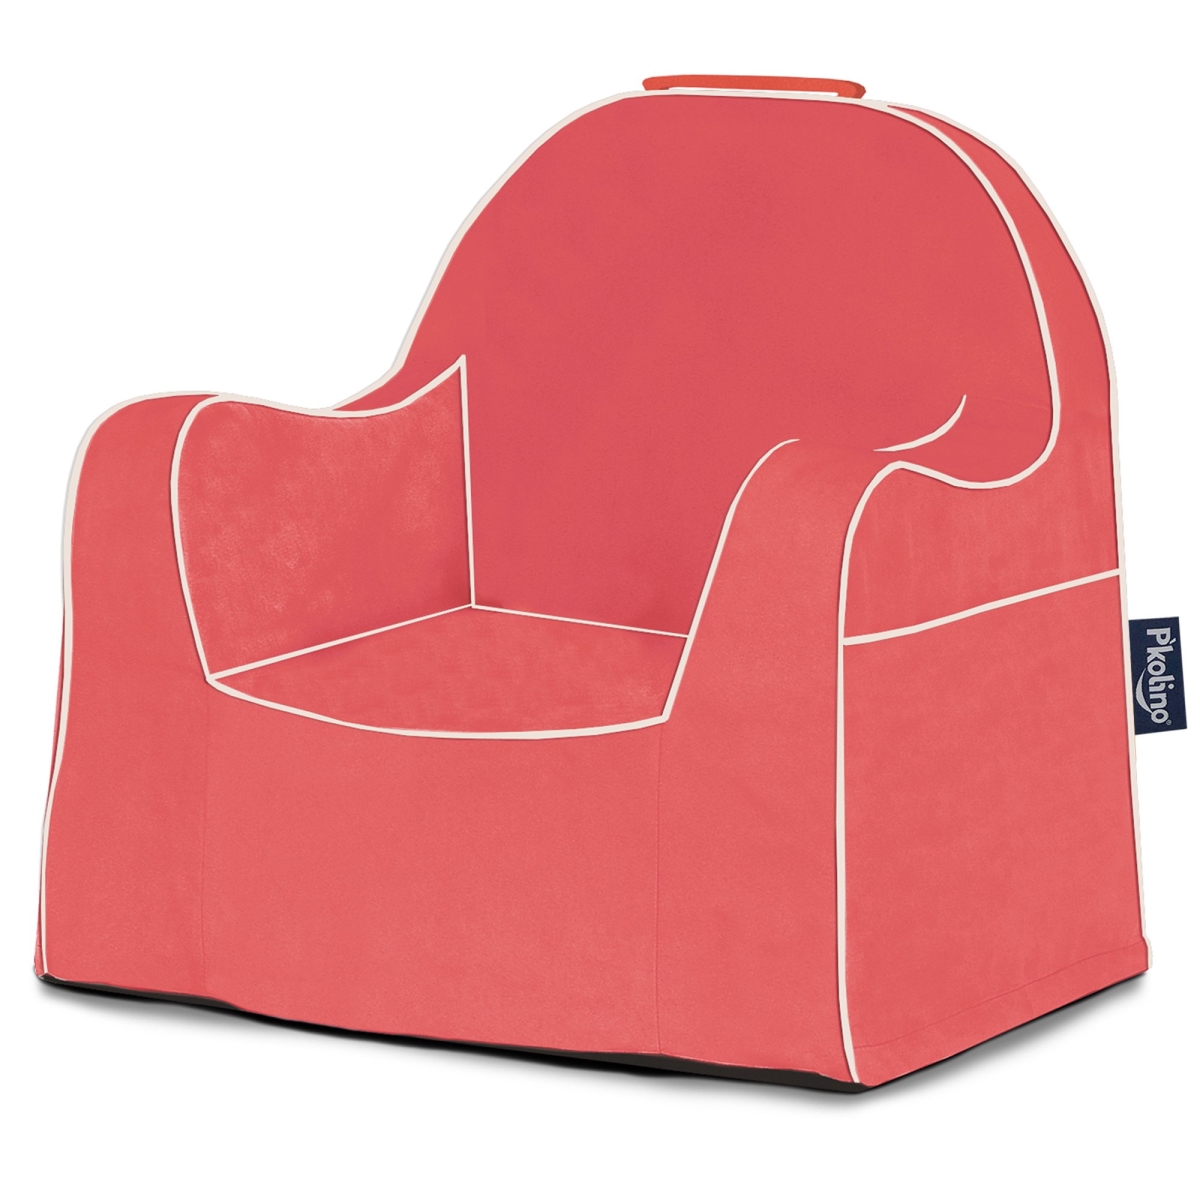 Pkfflrscr Little Reader Chair - Coral With White Piping - 17.75 X 16 X 18 In.